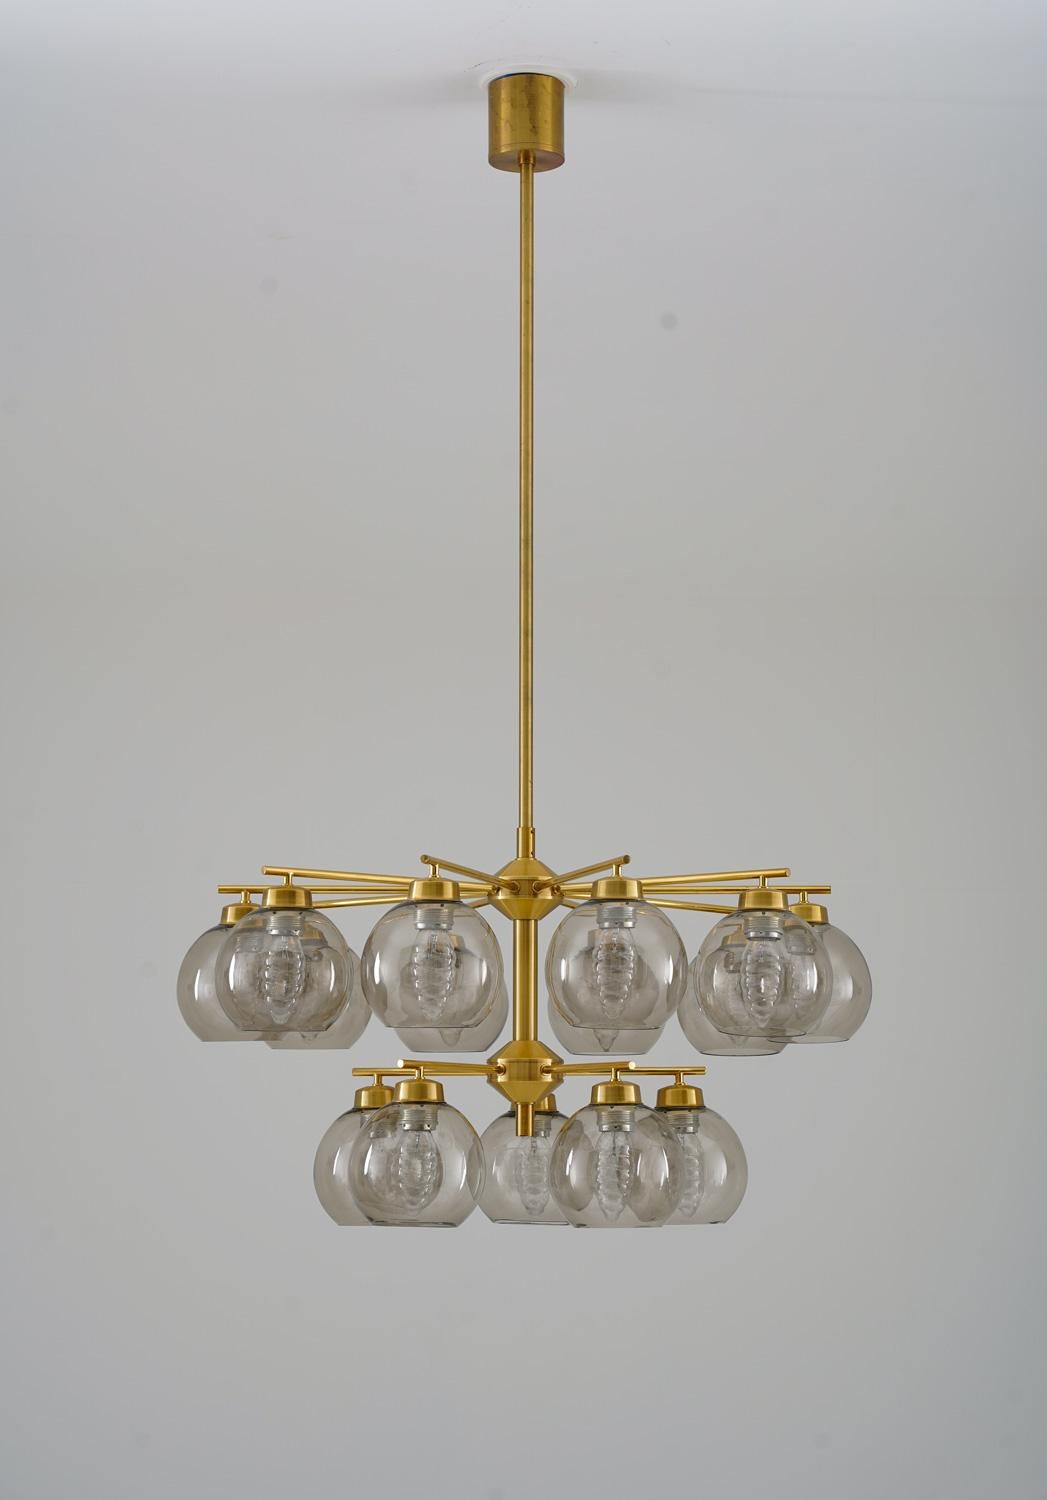 Mid-Century Modern chandeliers by Holger Johansson for Westal, Sweden.
The chandeliers consist of 15 round brass poles divided into two levels, each holding a smoke-colored glass shade.
The rods can be adjusted to your desired